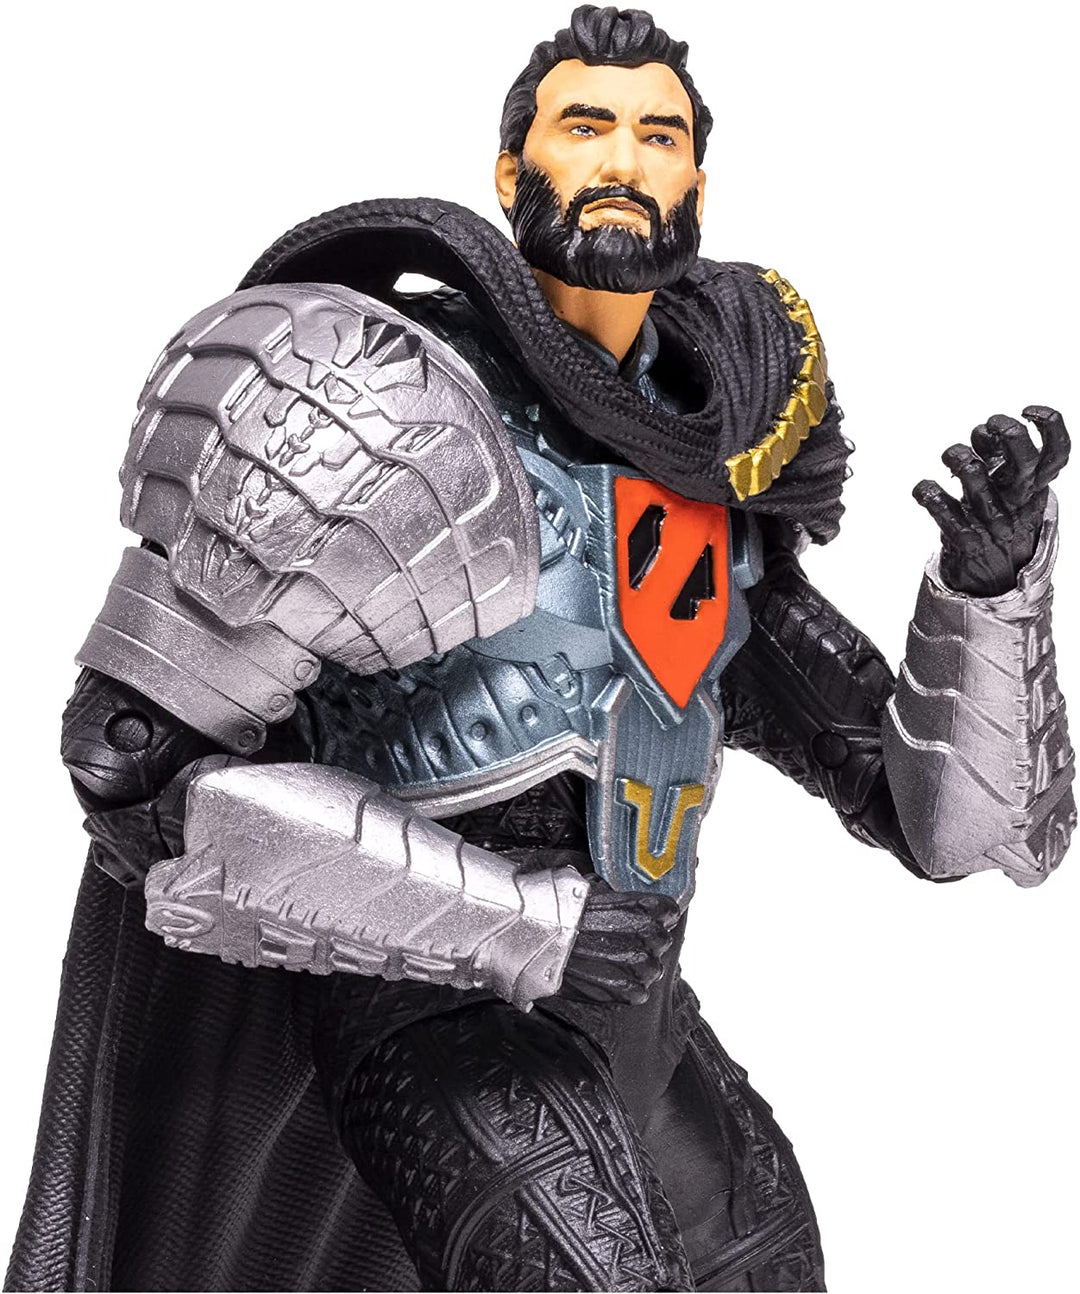 McFarlane DC Multiverse 7 Inch Collectible Figure - General Zod